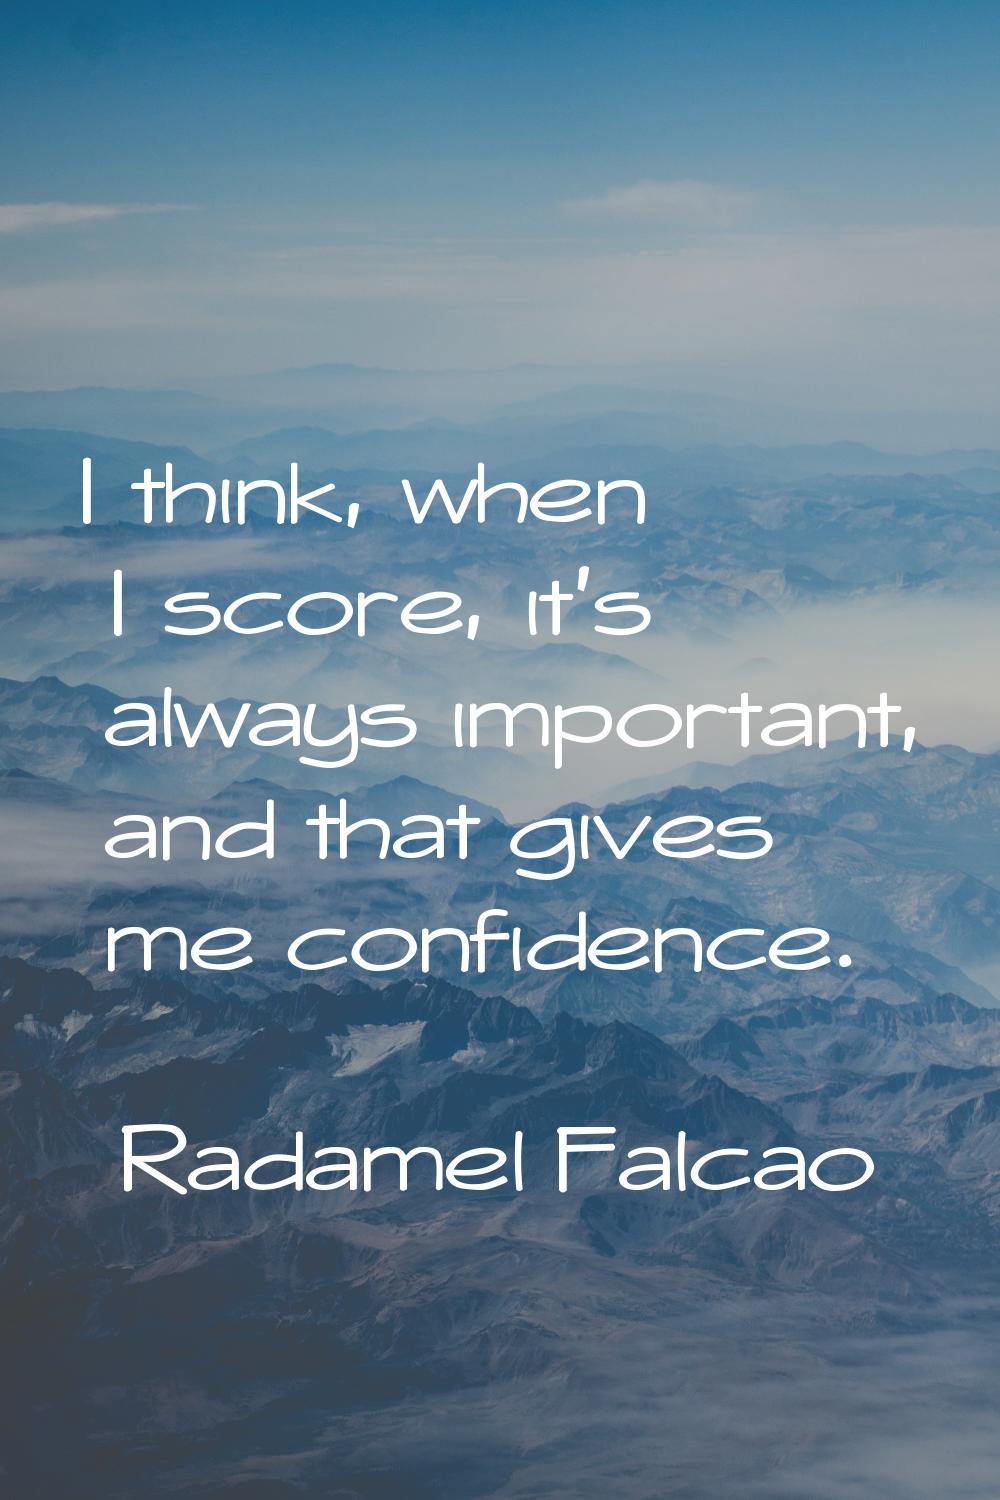 I think, when I score, it's always important, and that gives me confidence.